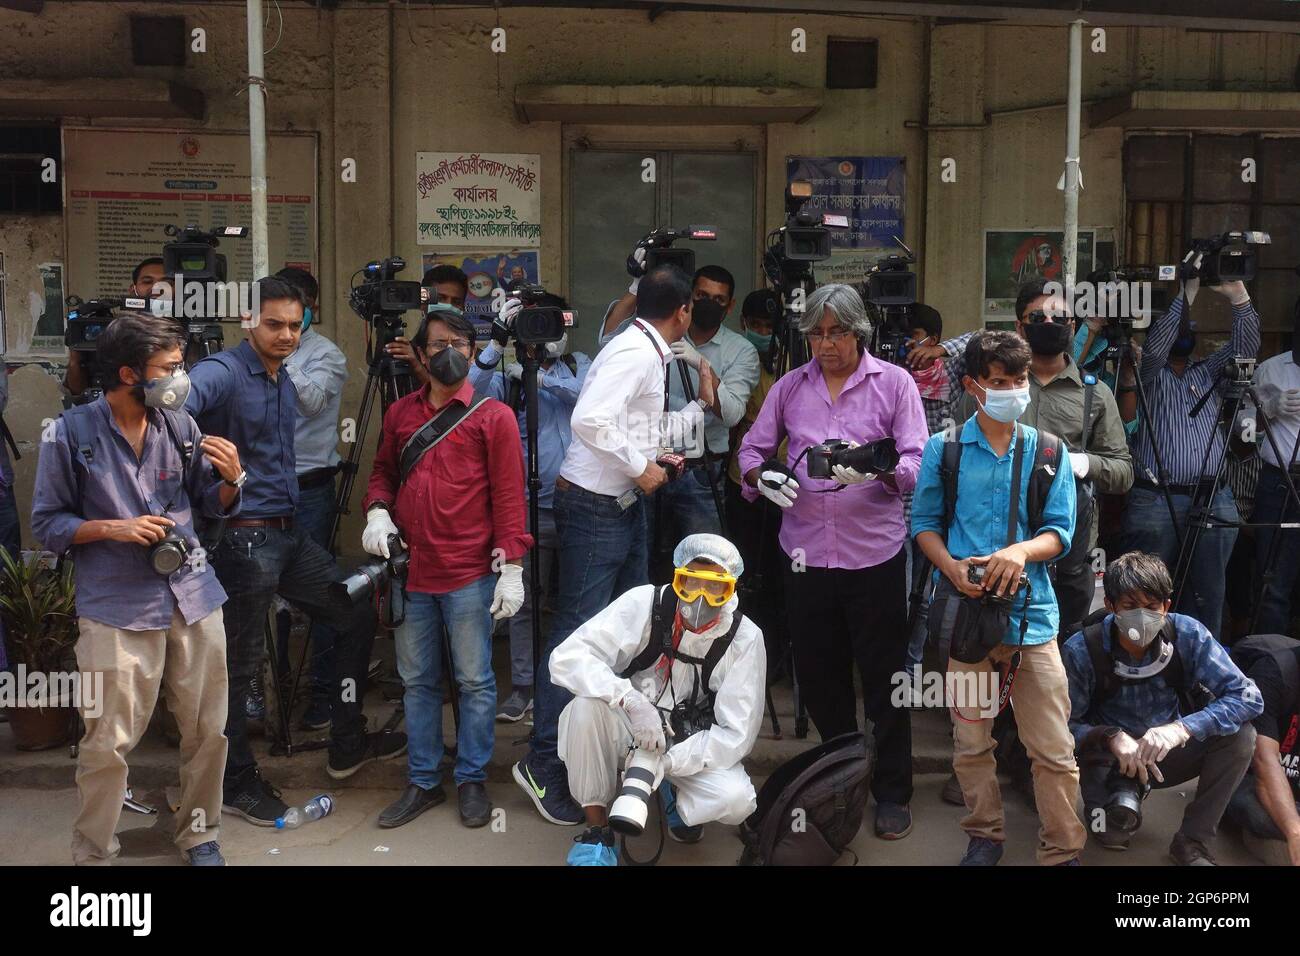 A group of journalist waiting for a politican during lockdown. The country has had several lockdowns to contain the spread of the Coronavirus. Dhaka, Bangladesh. Stock Photo